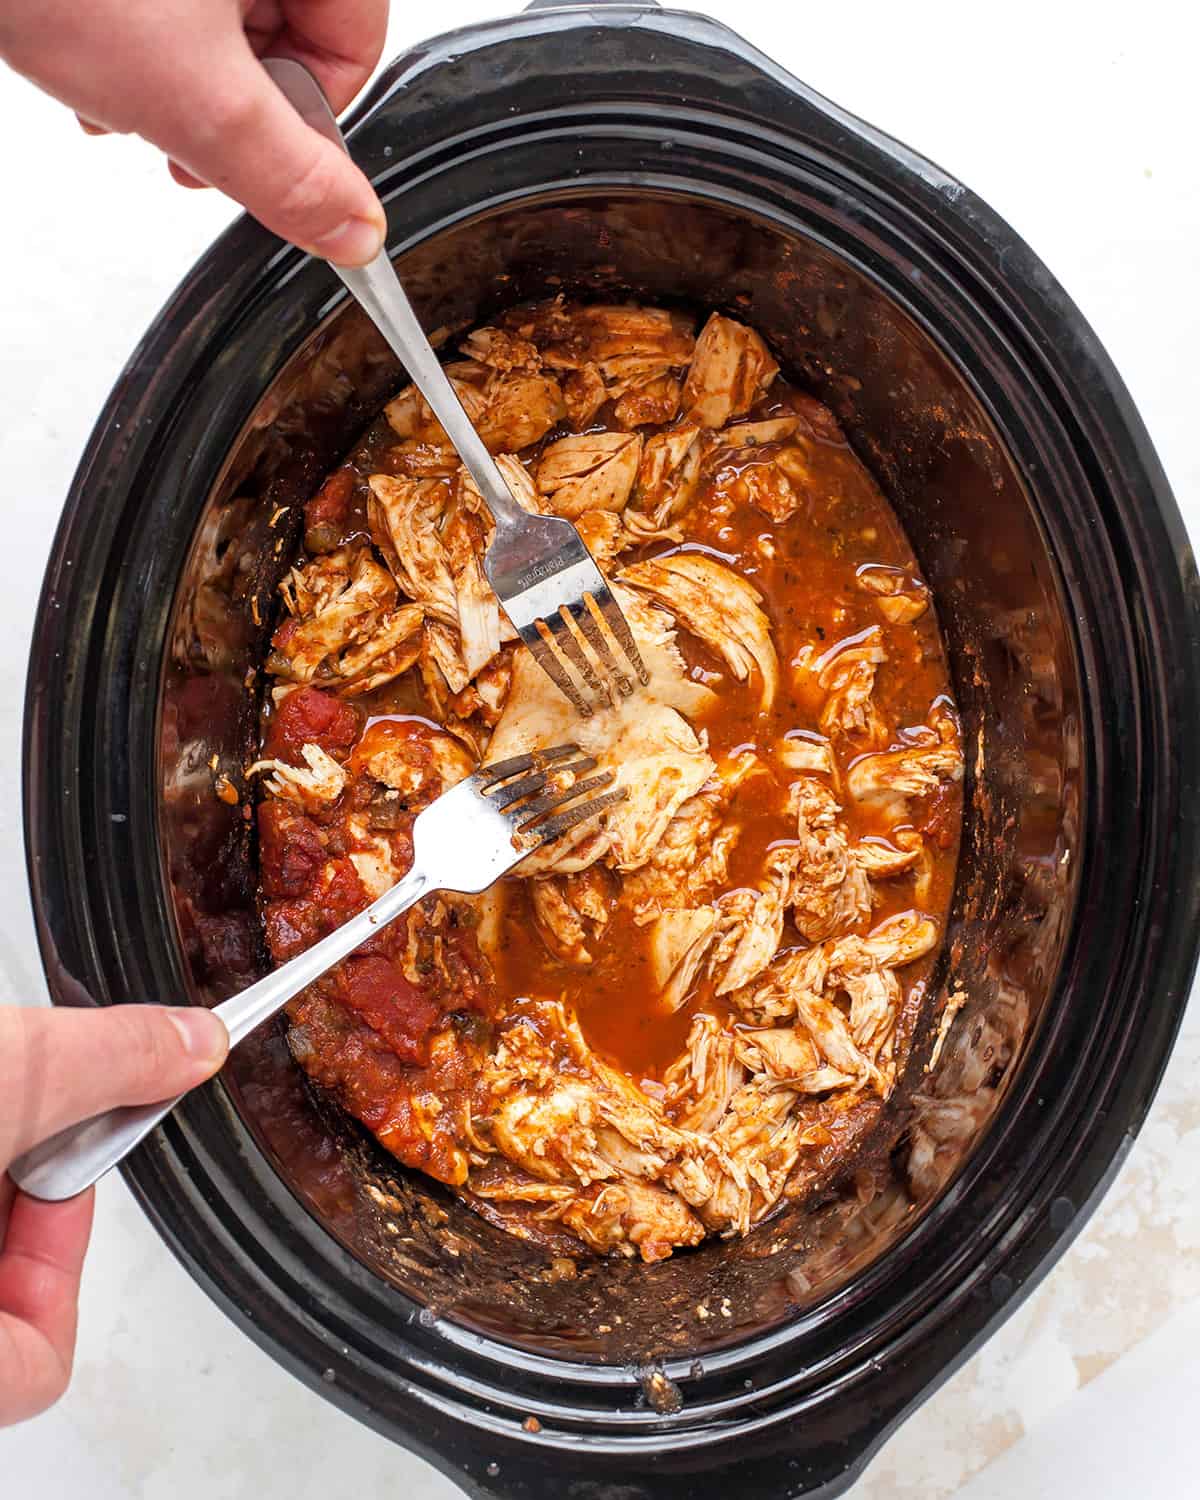 a hand with two forks shredding chicken in a crock pot for shredded chicken tacos